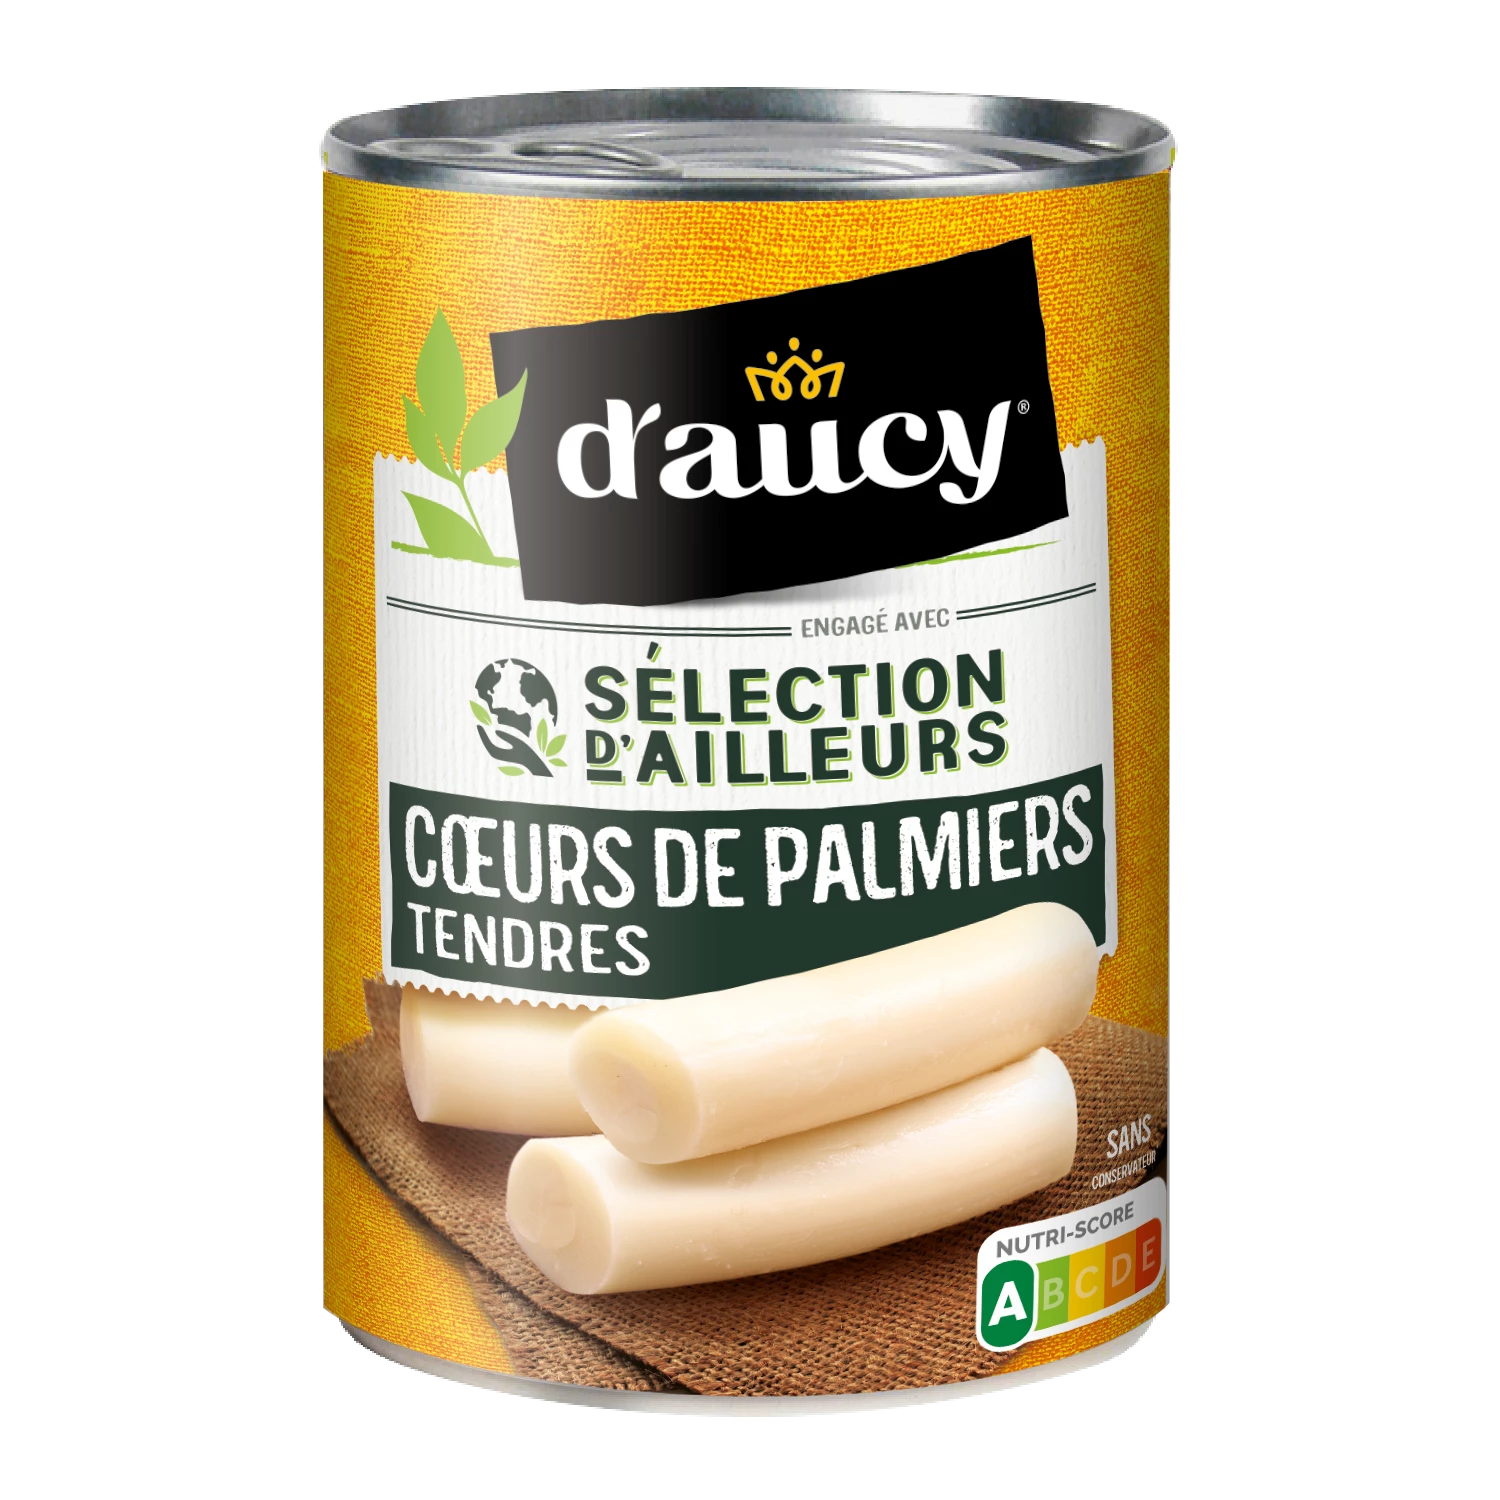 Tender Palm Hearts Selection from Elsewhere; 220g - D'AUCY